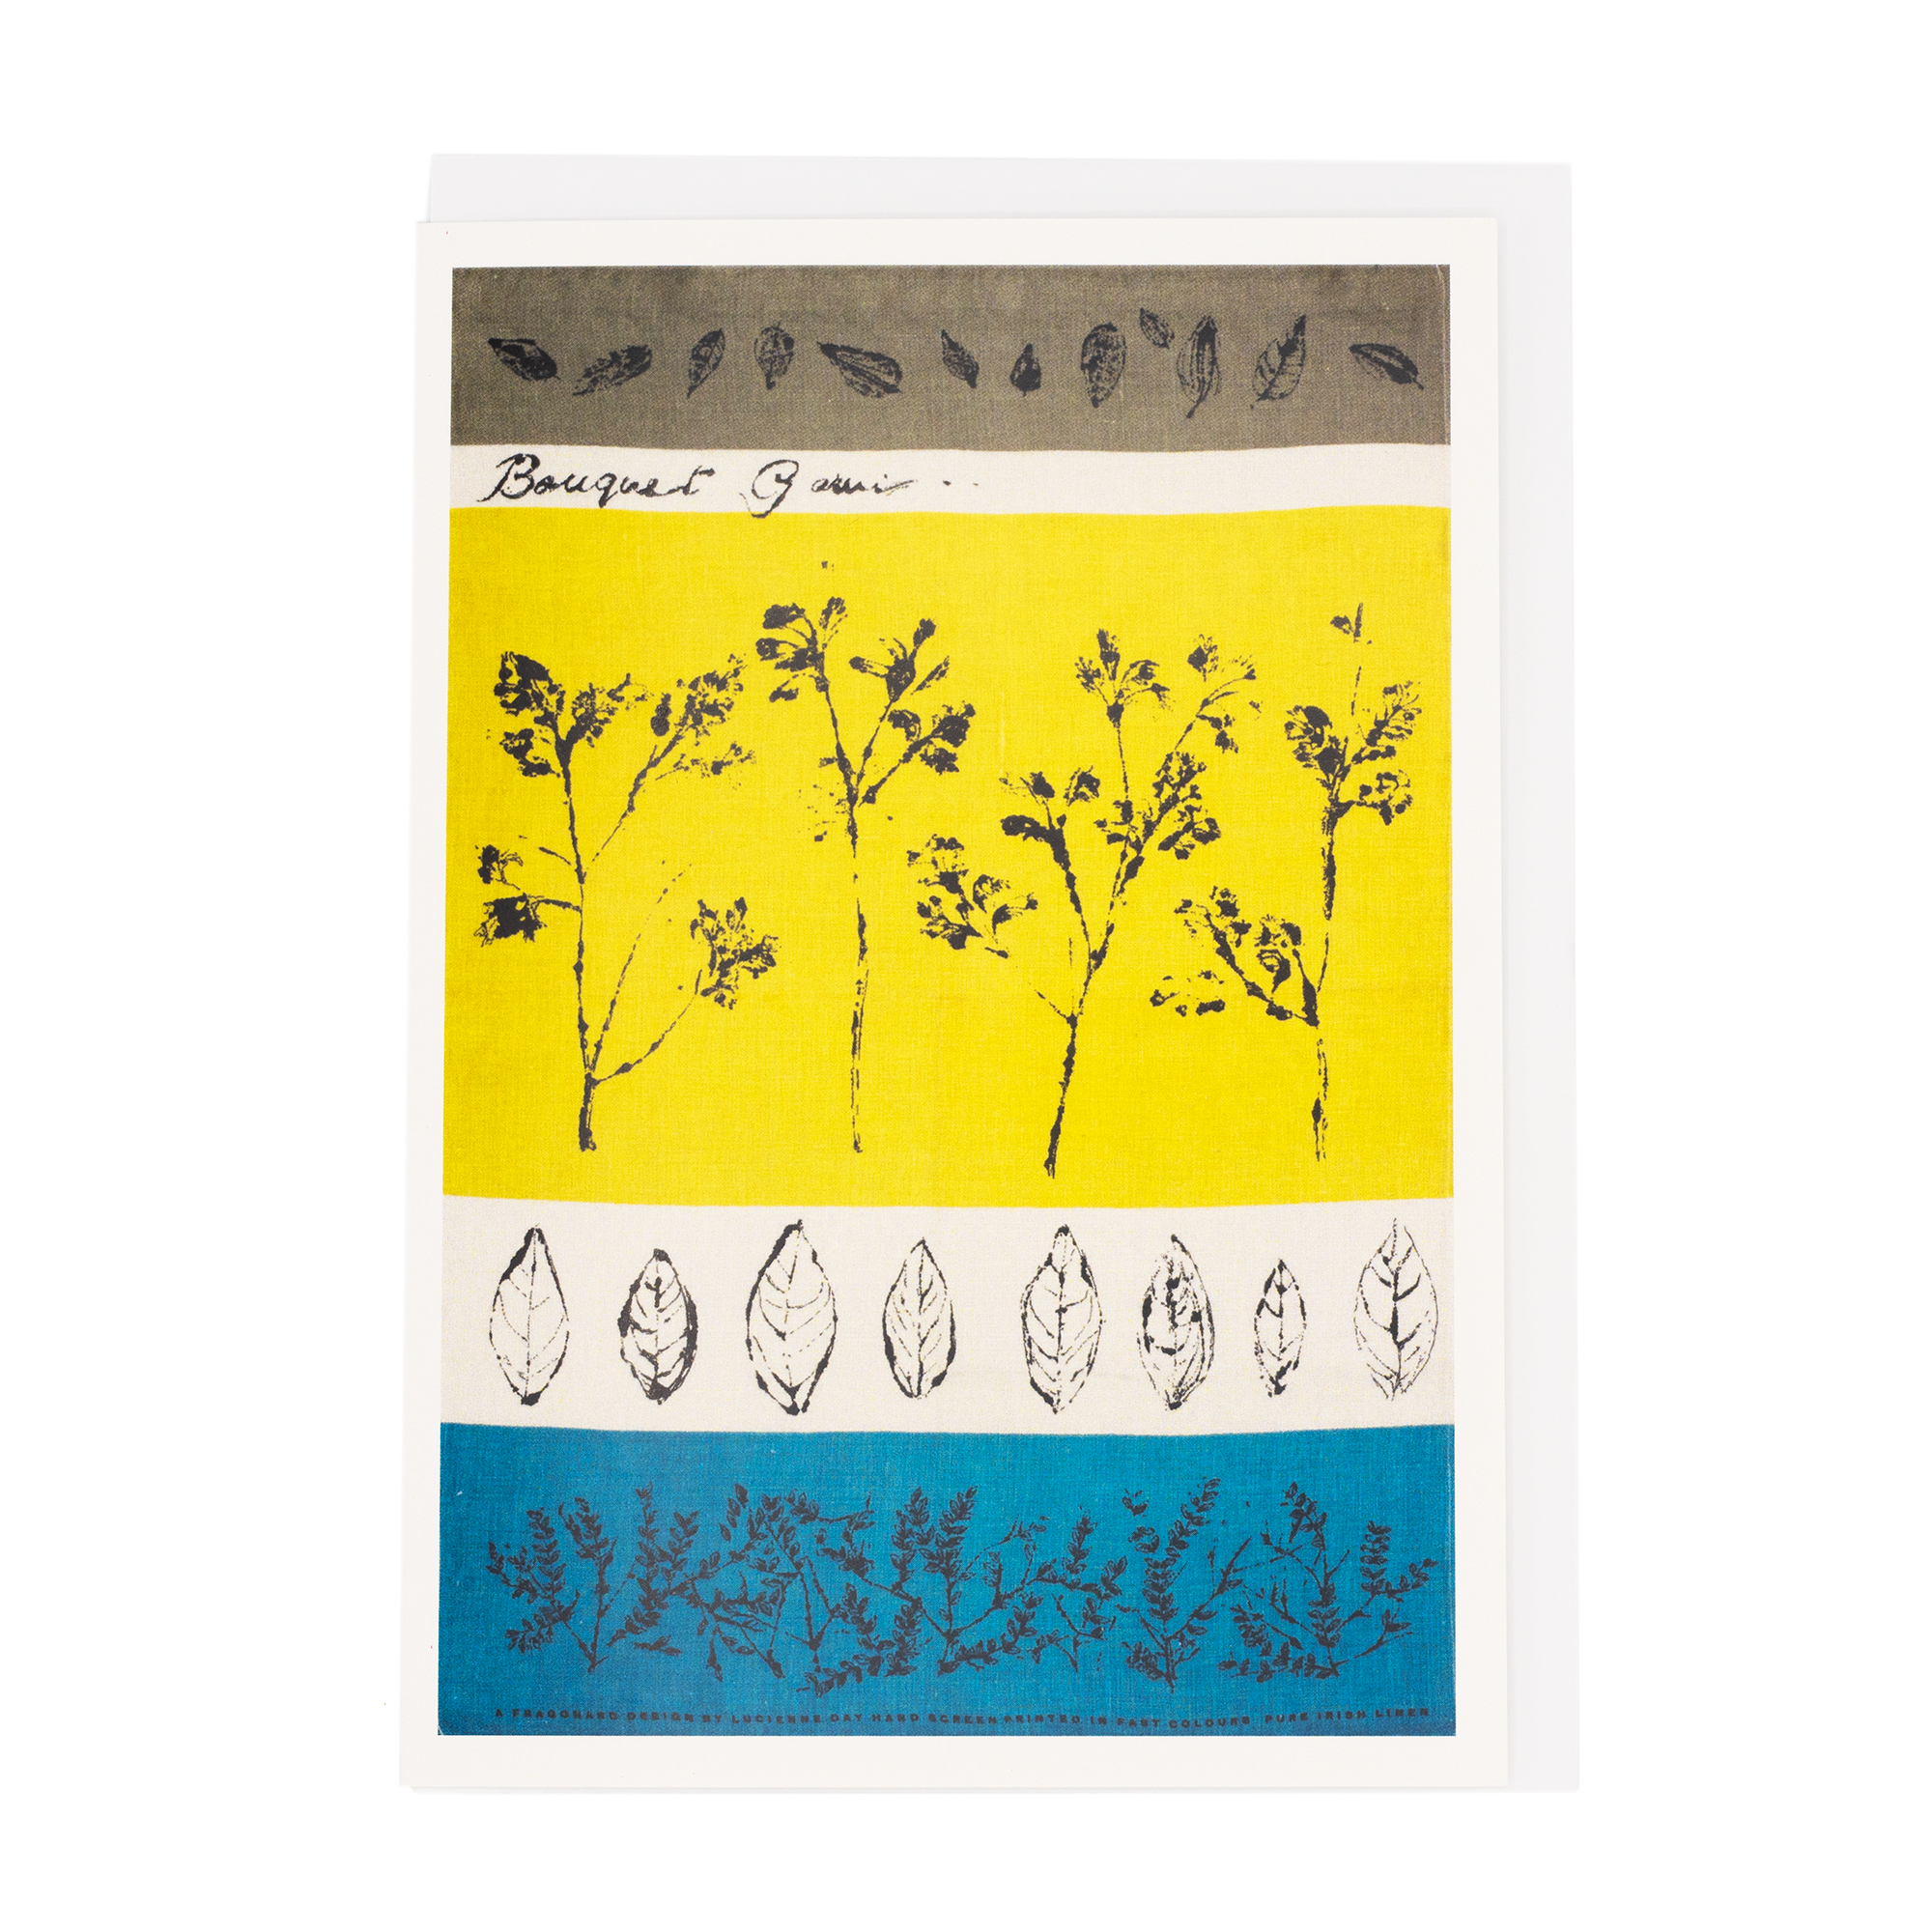 Lucienne Day's Bouquet Garni design on a greetings card, white background